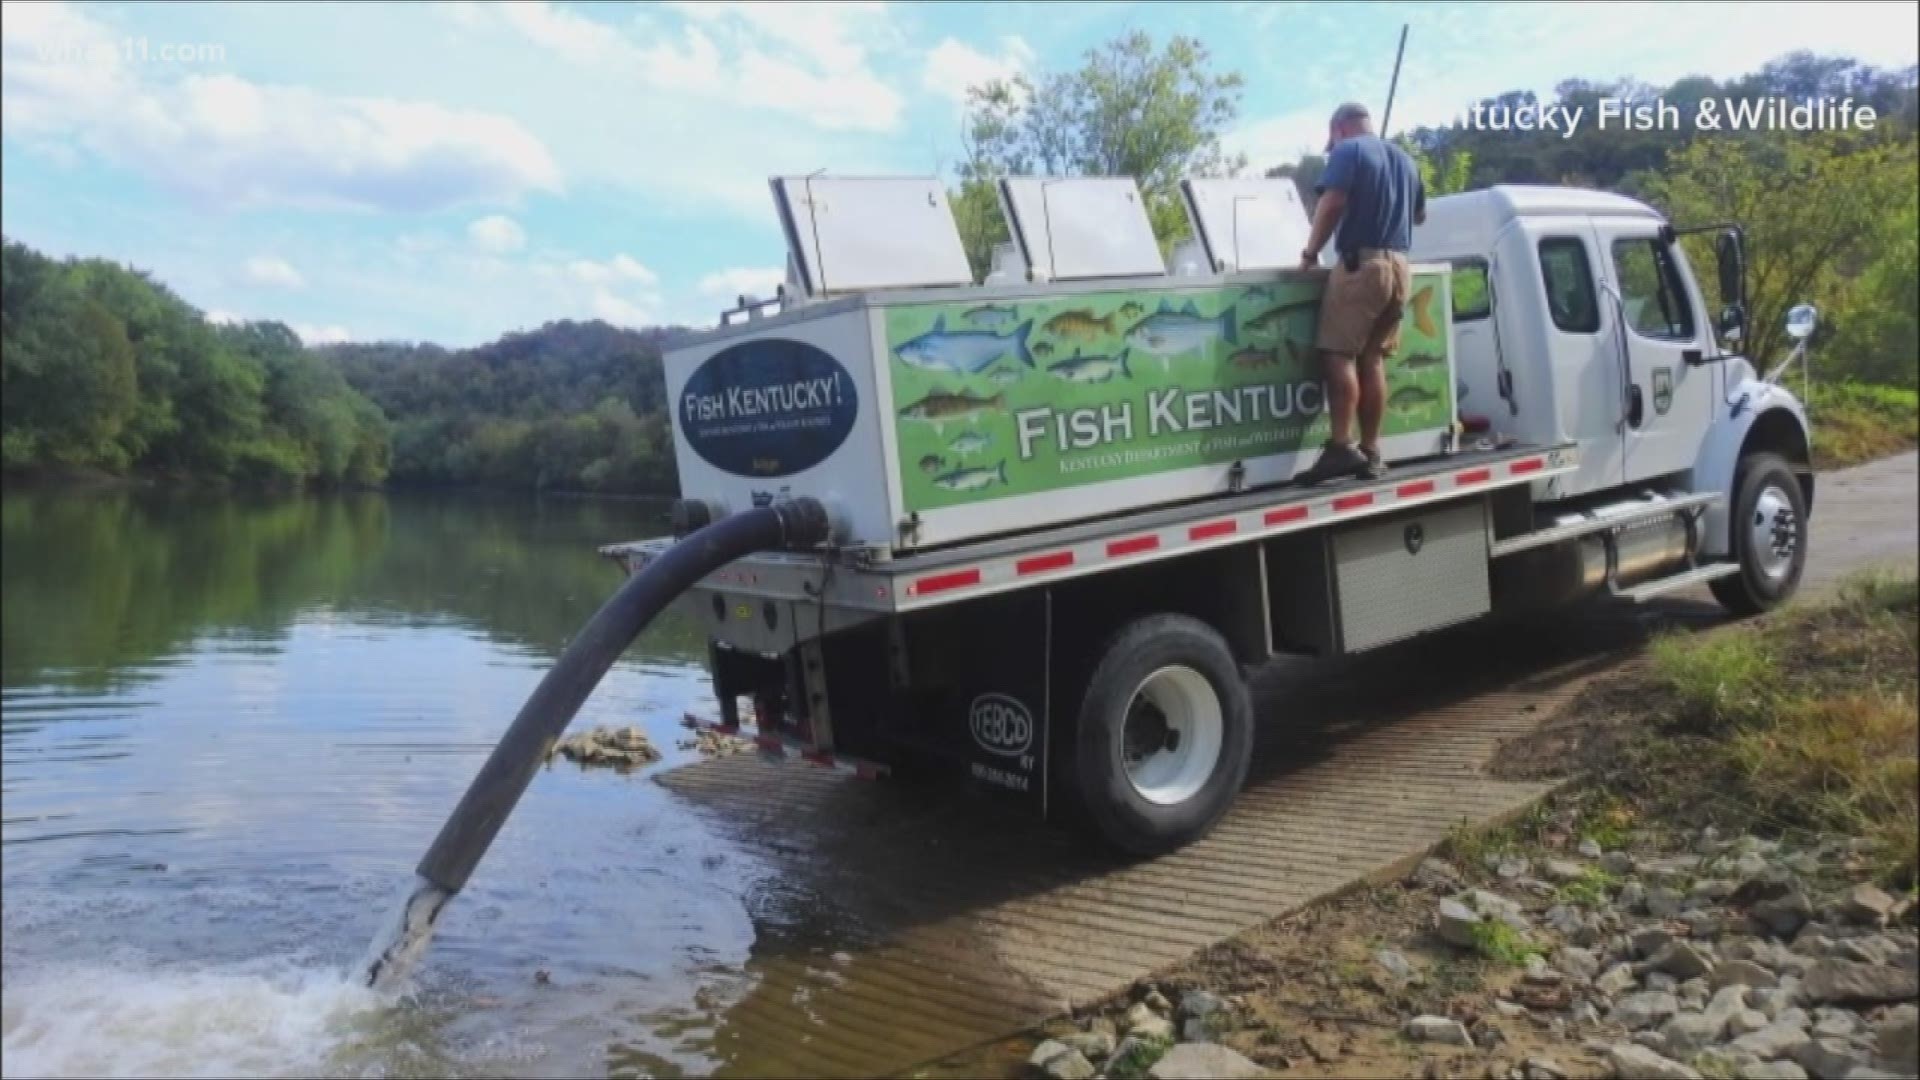 The Kentucky Department of Fish and Wildlife says catfishing is popular in the Kentucky River -- but populations are low right now so they're thankful for the donati